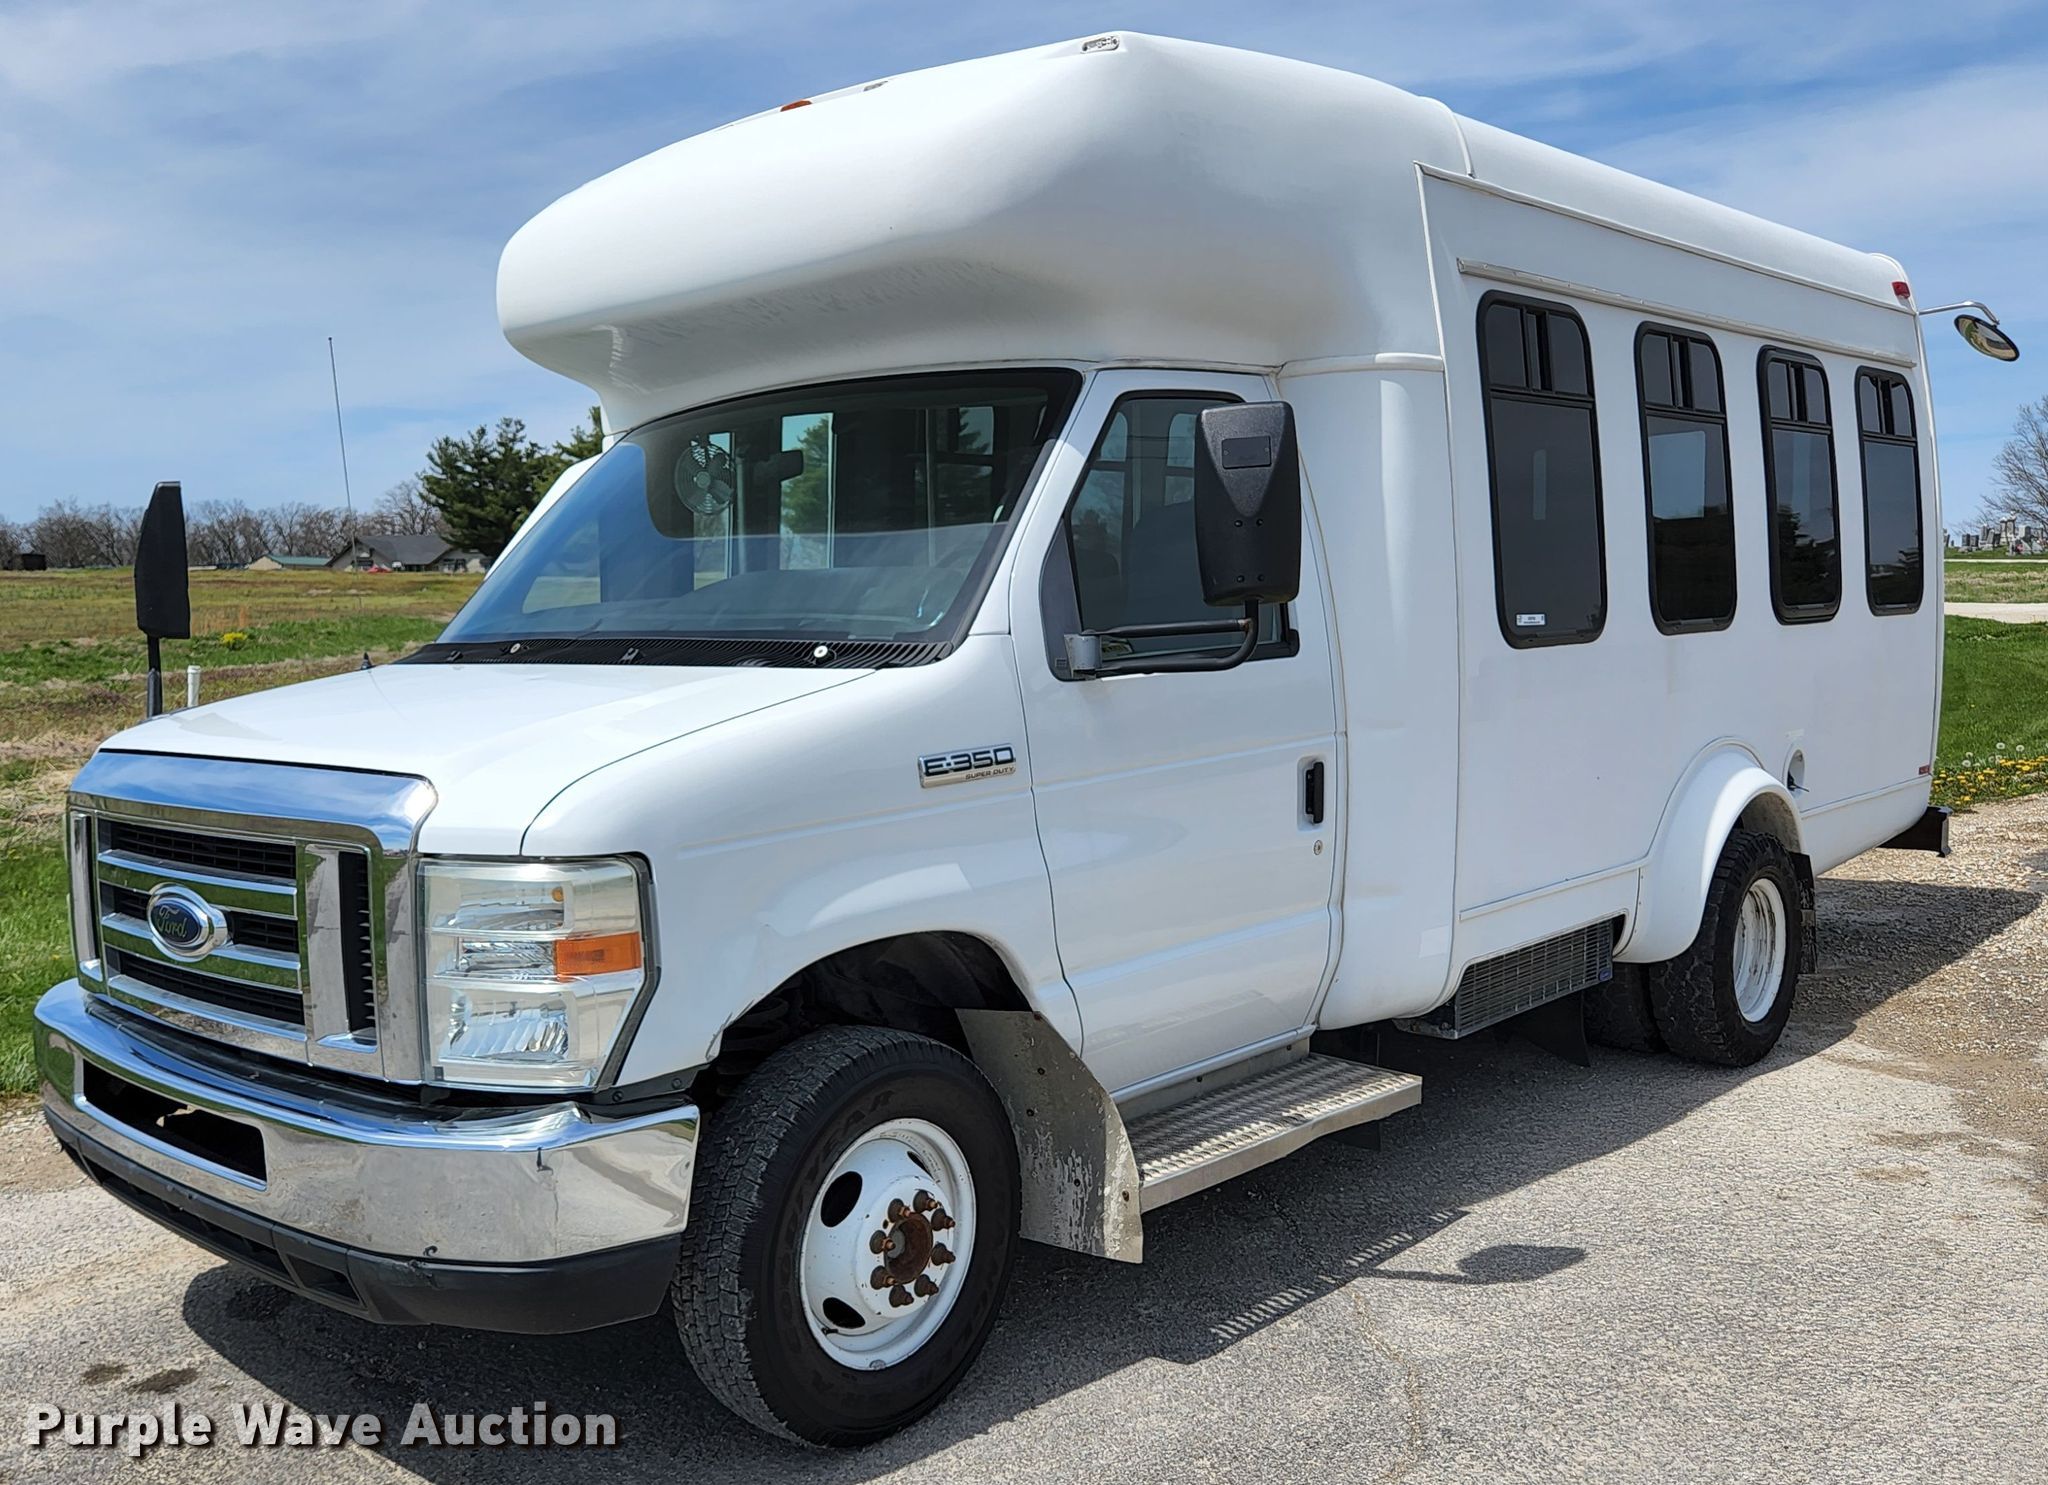 2009 Ford E350 Super Duty bus in Moscow Mills, MO | Item KE9766 sold |  Purple Wave